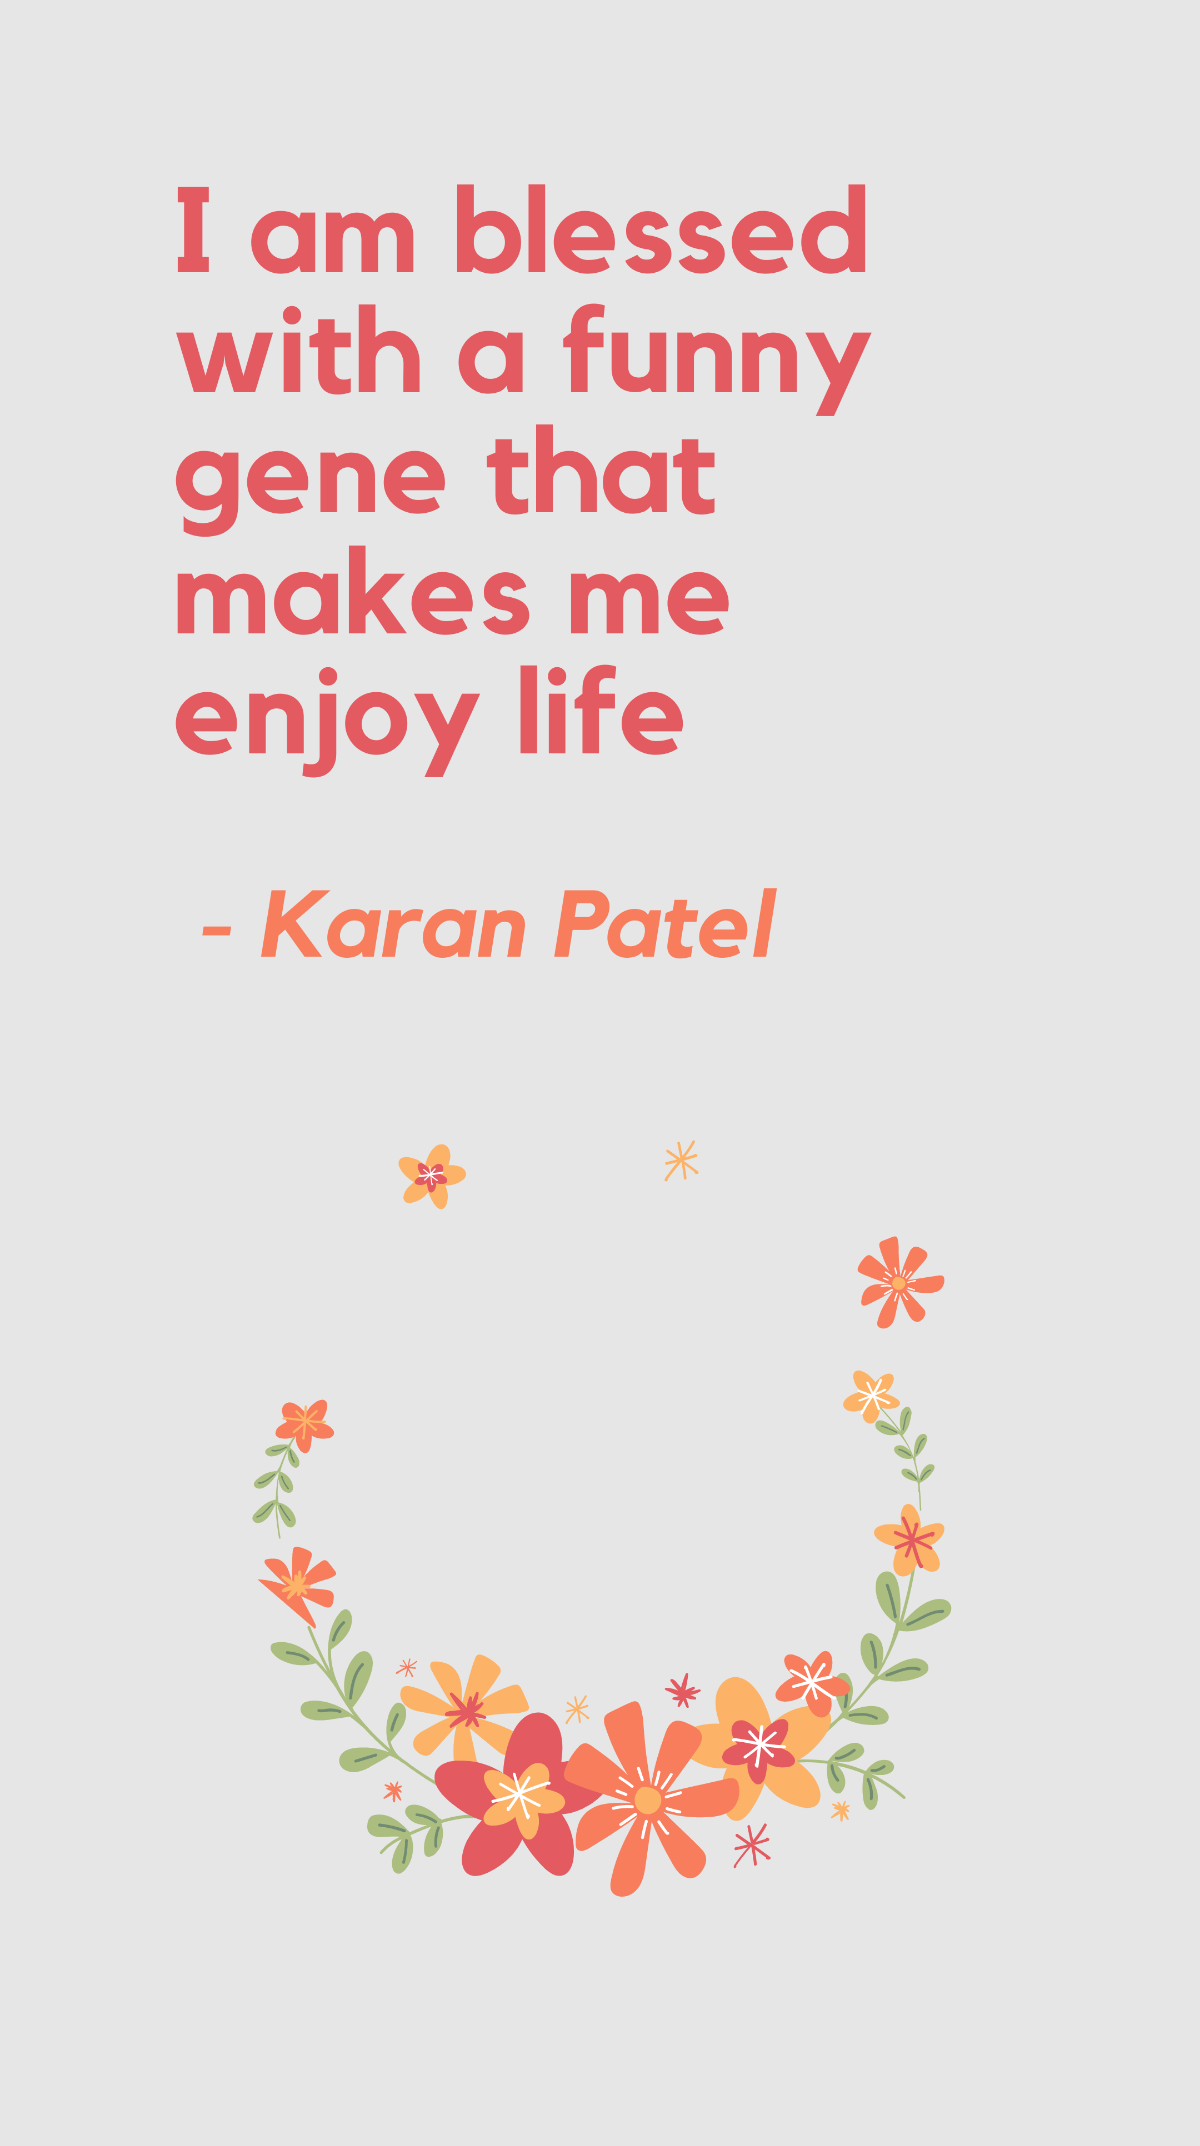 Free Karan Patel - I am blessed with a funny gene that makes me enjoy life Template